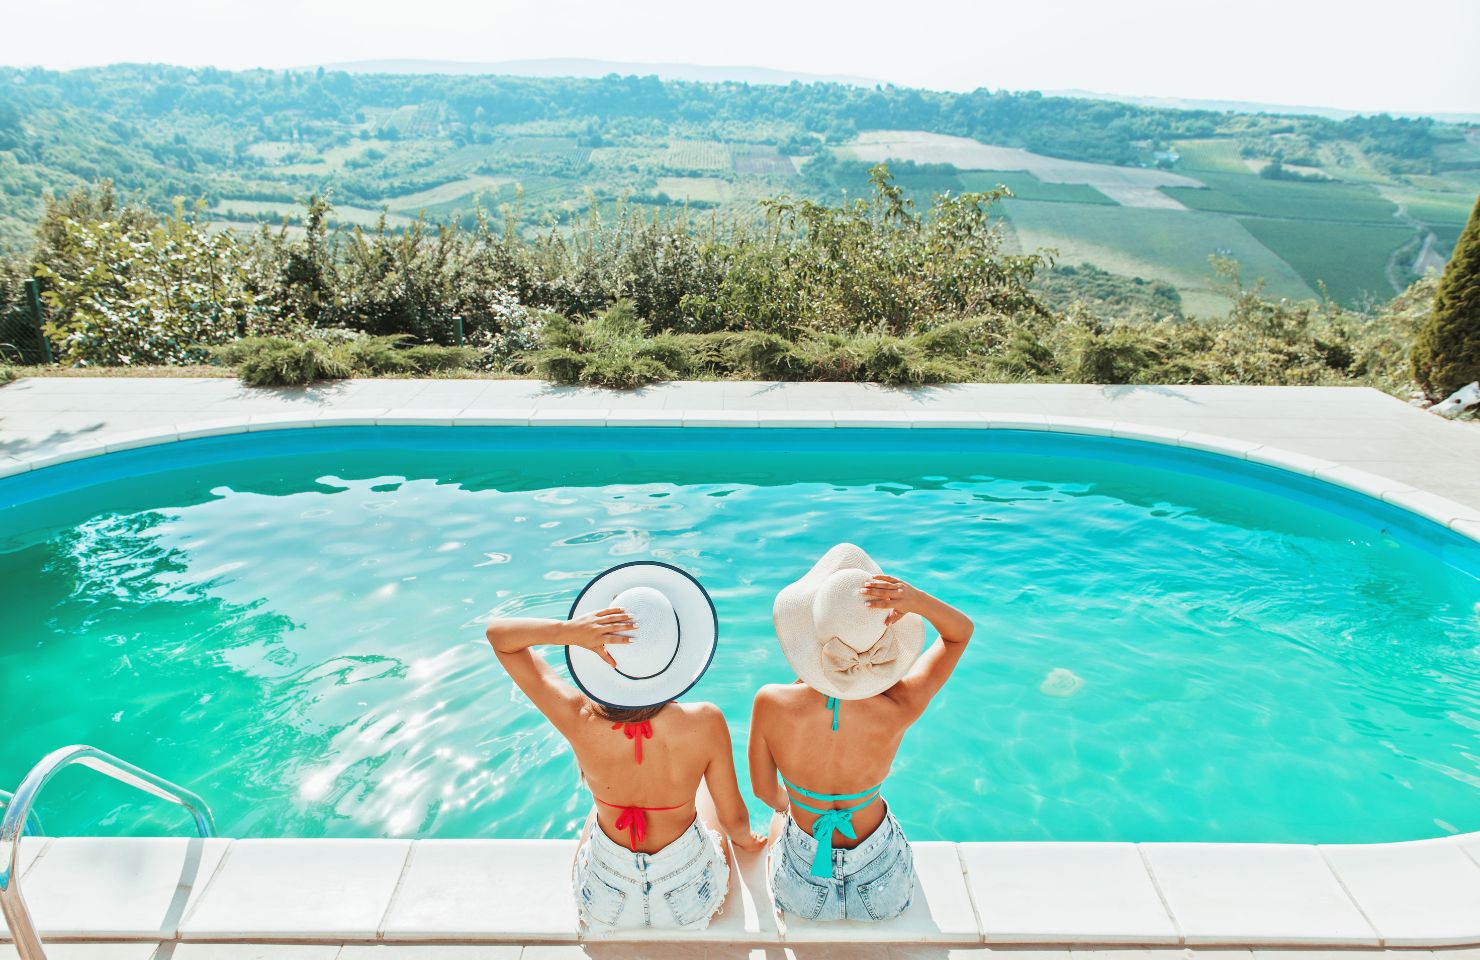 two friends enjoying a swimming pool in summer